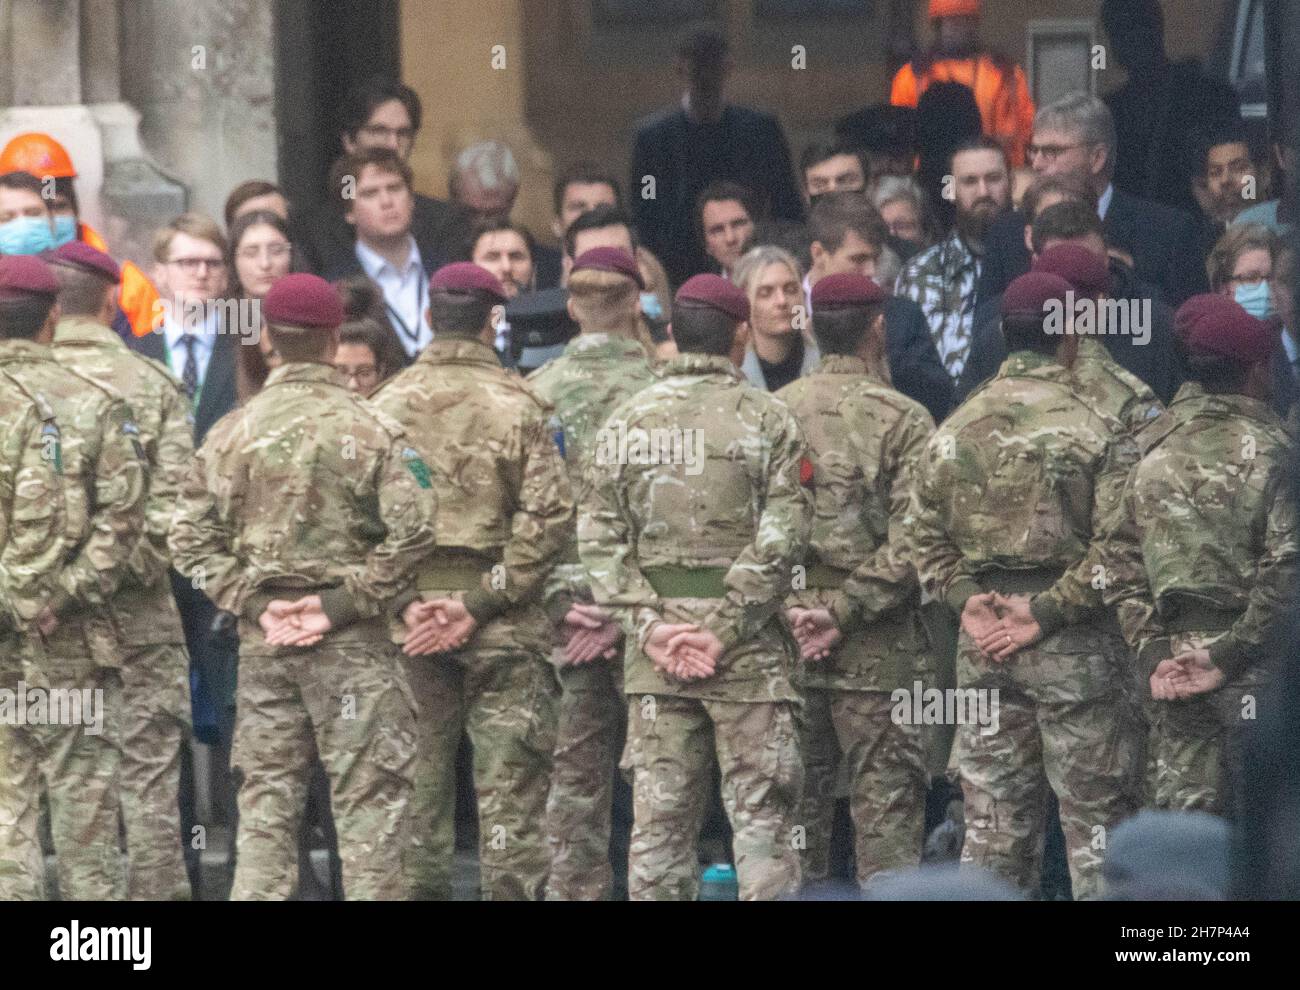 London, UK. 24th Nov, 2021. Parade and Parliamentary reception for personnel and officials who worked on Operation Pitting, which worked to evacuate British nationals and eligible Afghans from Afghanistan as the country fell to the Taliban. Credit: Ian Davidson/Alamy Live News Stock Photo